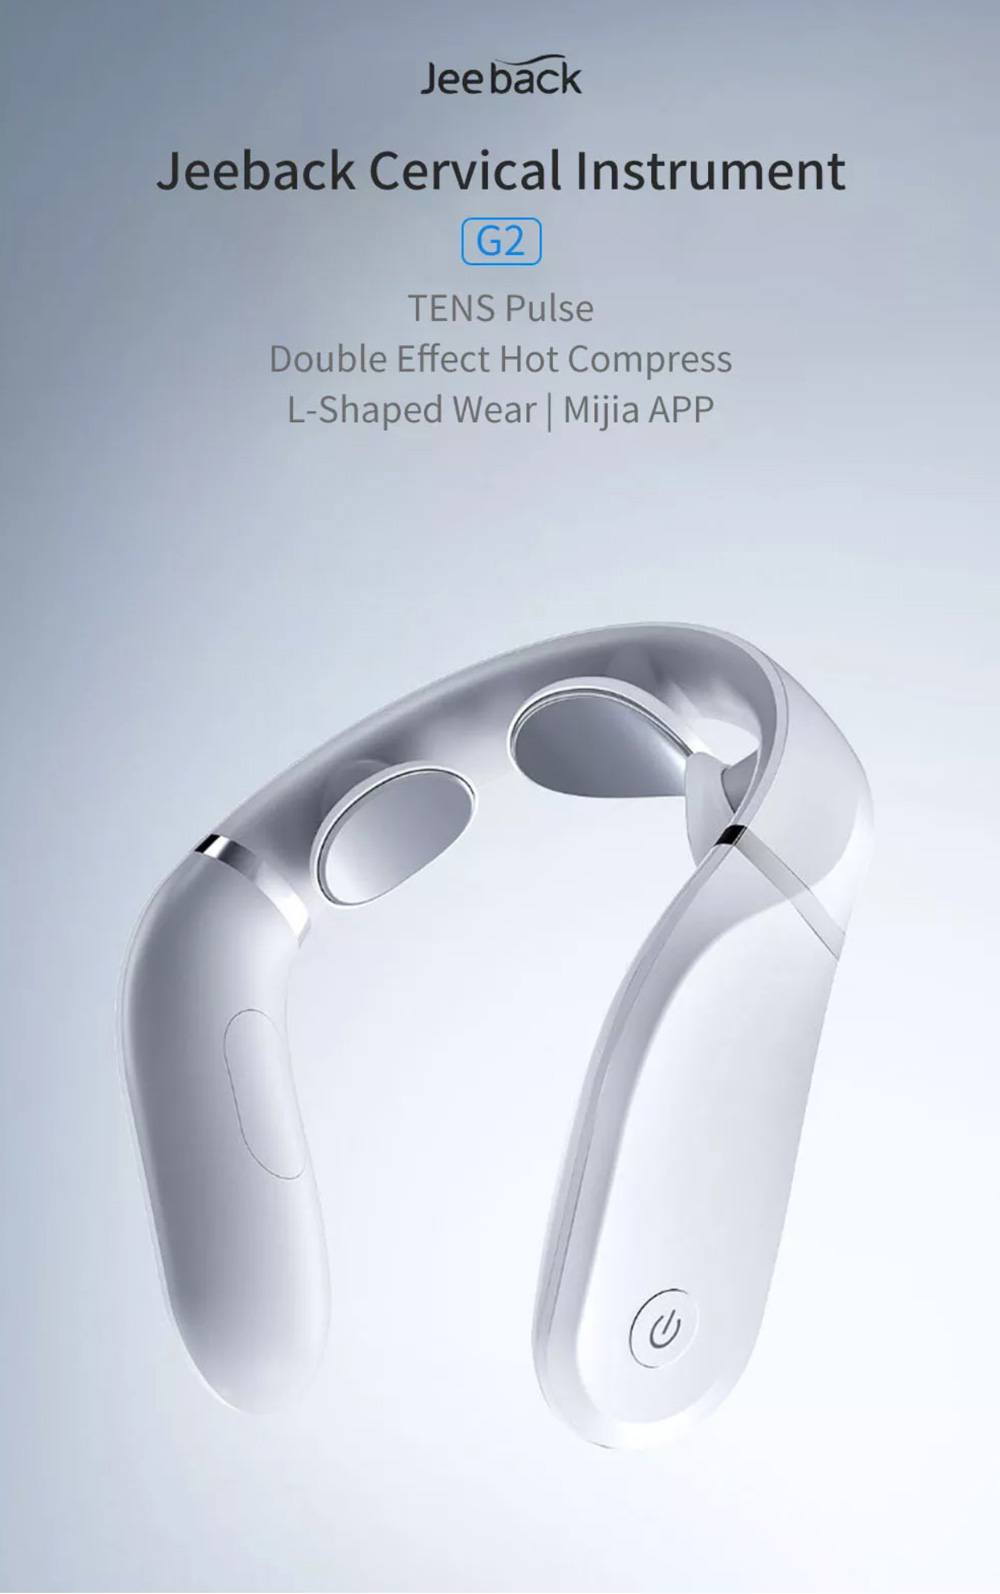 Jeeback G2 L-shaped Neck Massager APP Remote Control 3 Head Infrared Heating Cervical Instrument From Xiaomi Youpin - White